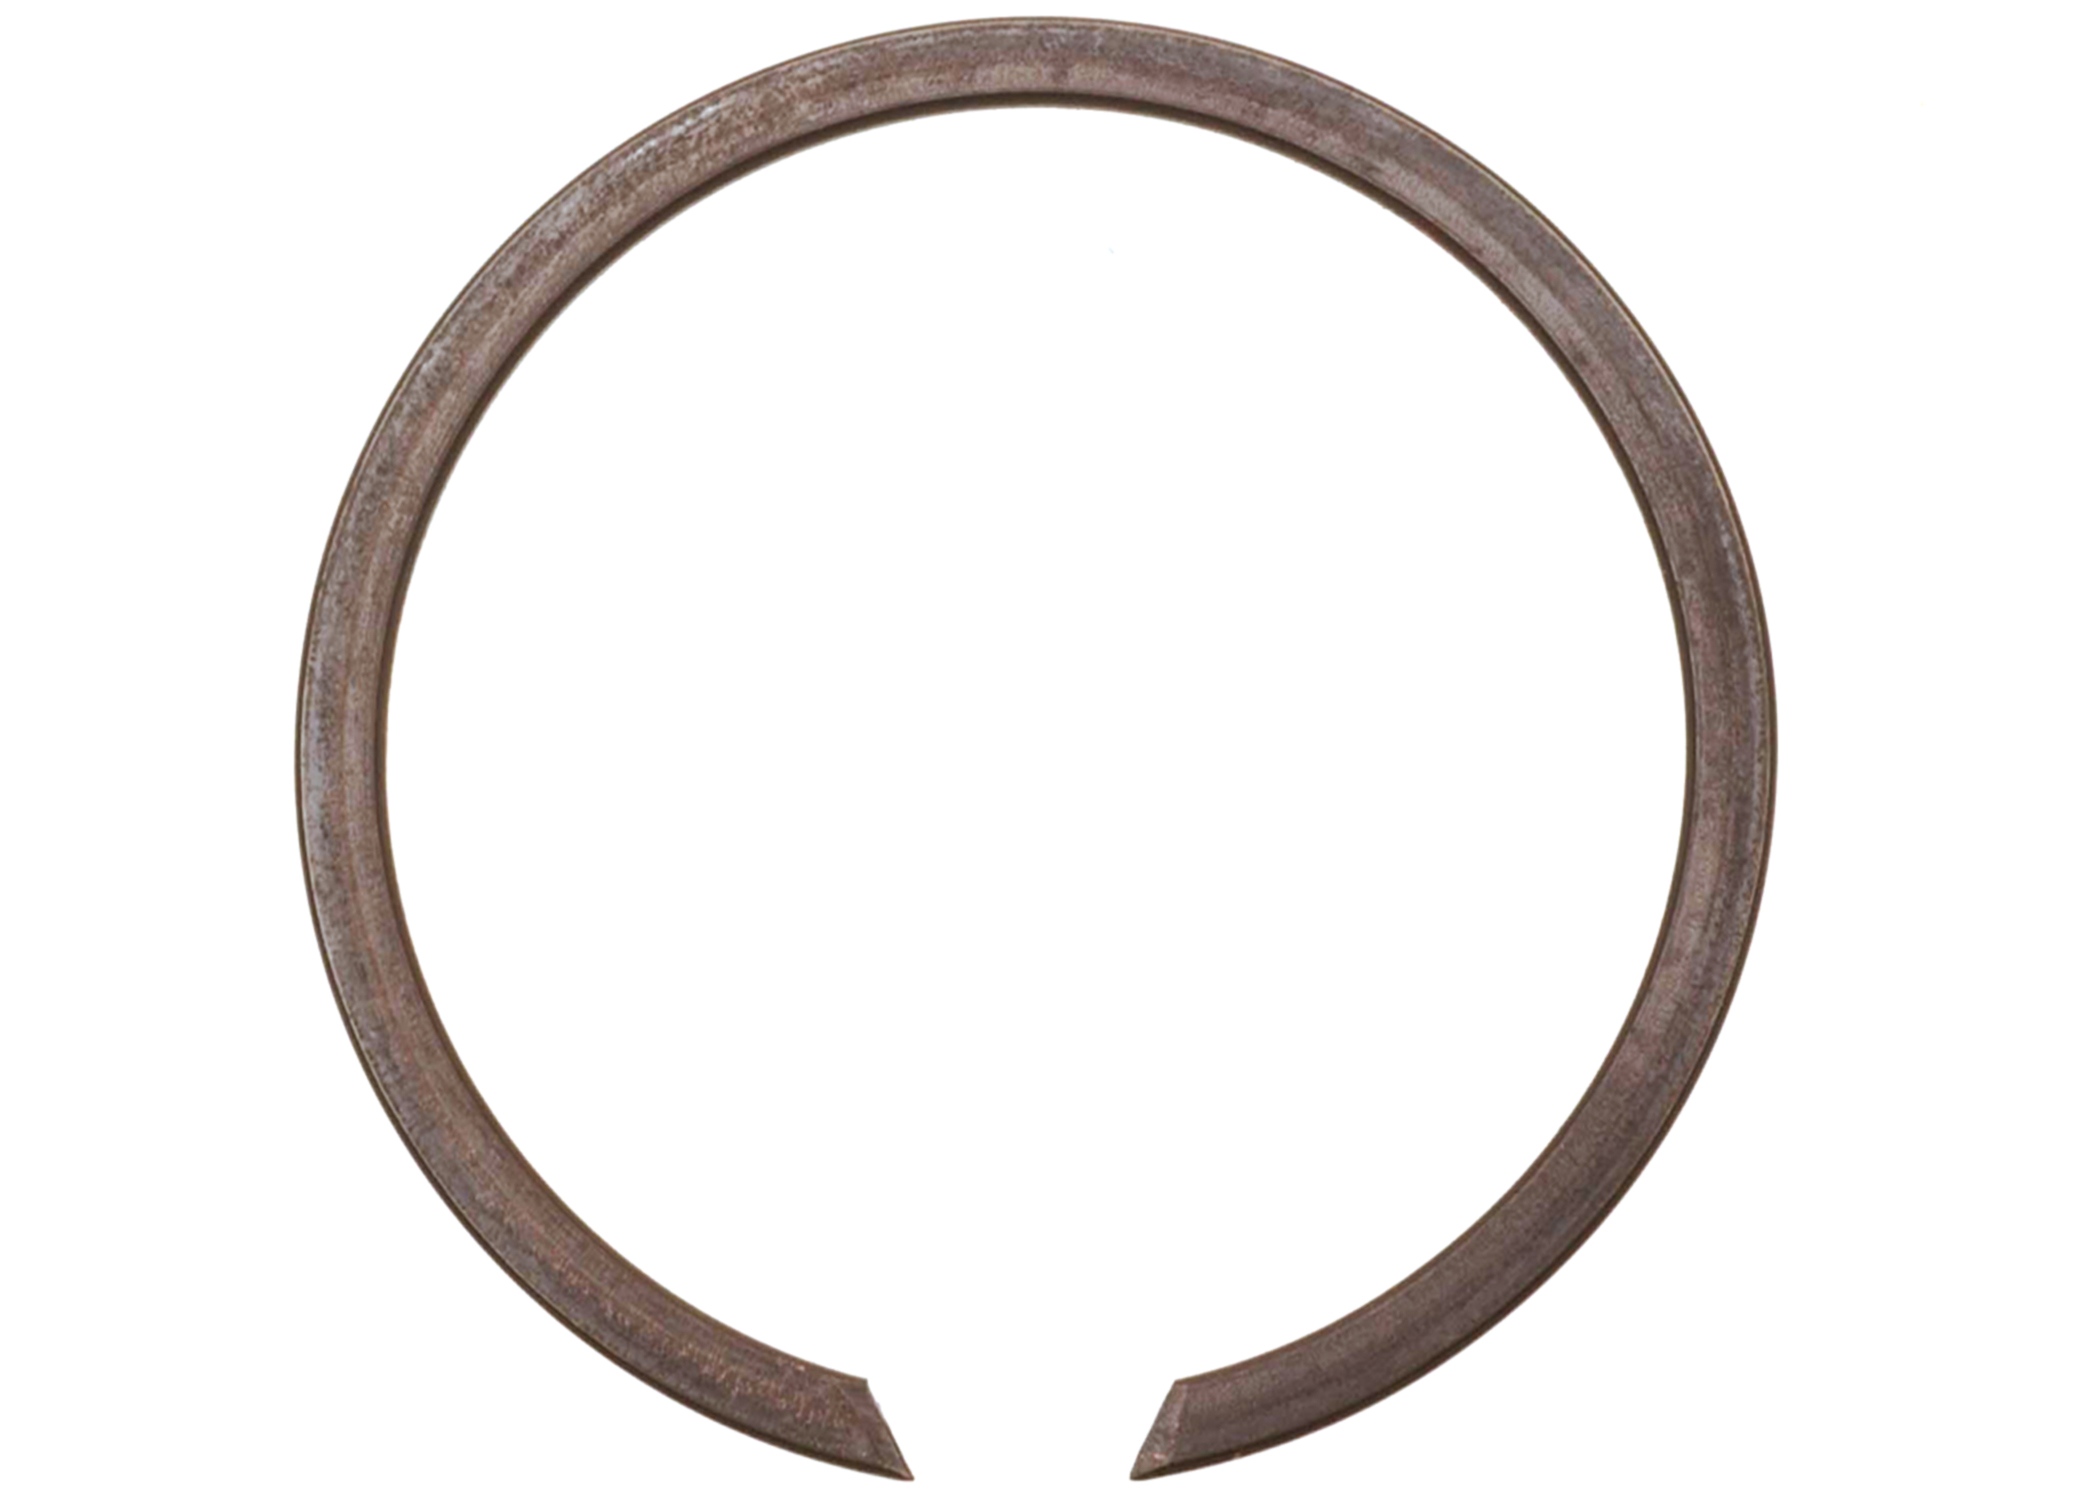 ACDELCO GM ORIGINAL EQUIPMENT - Automatic Transmission Clutch Spring Retaining Ring - DCB 8623105